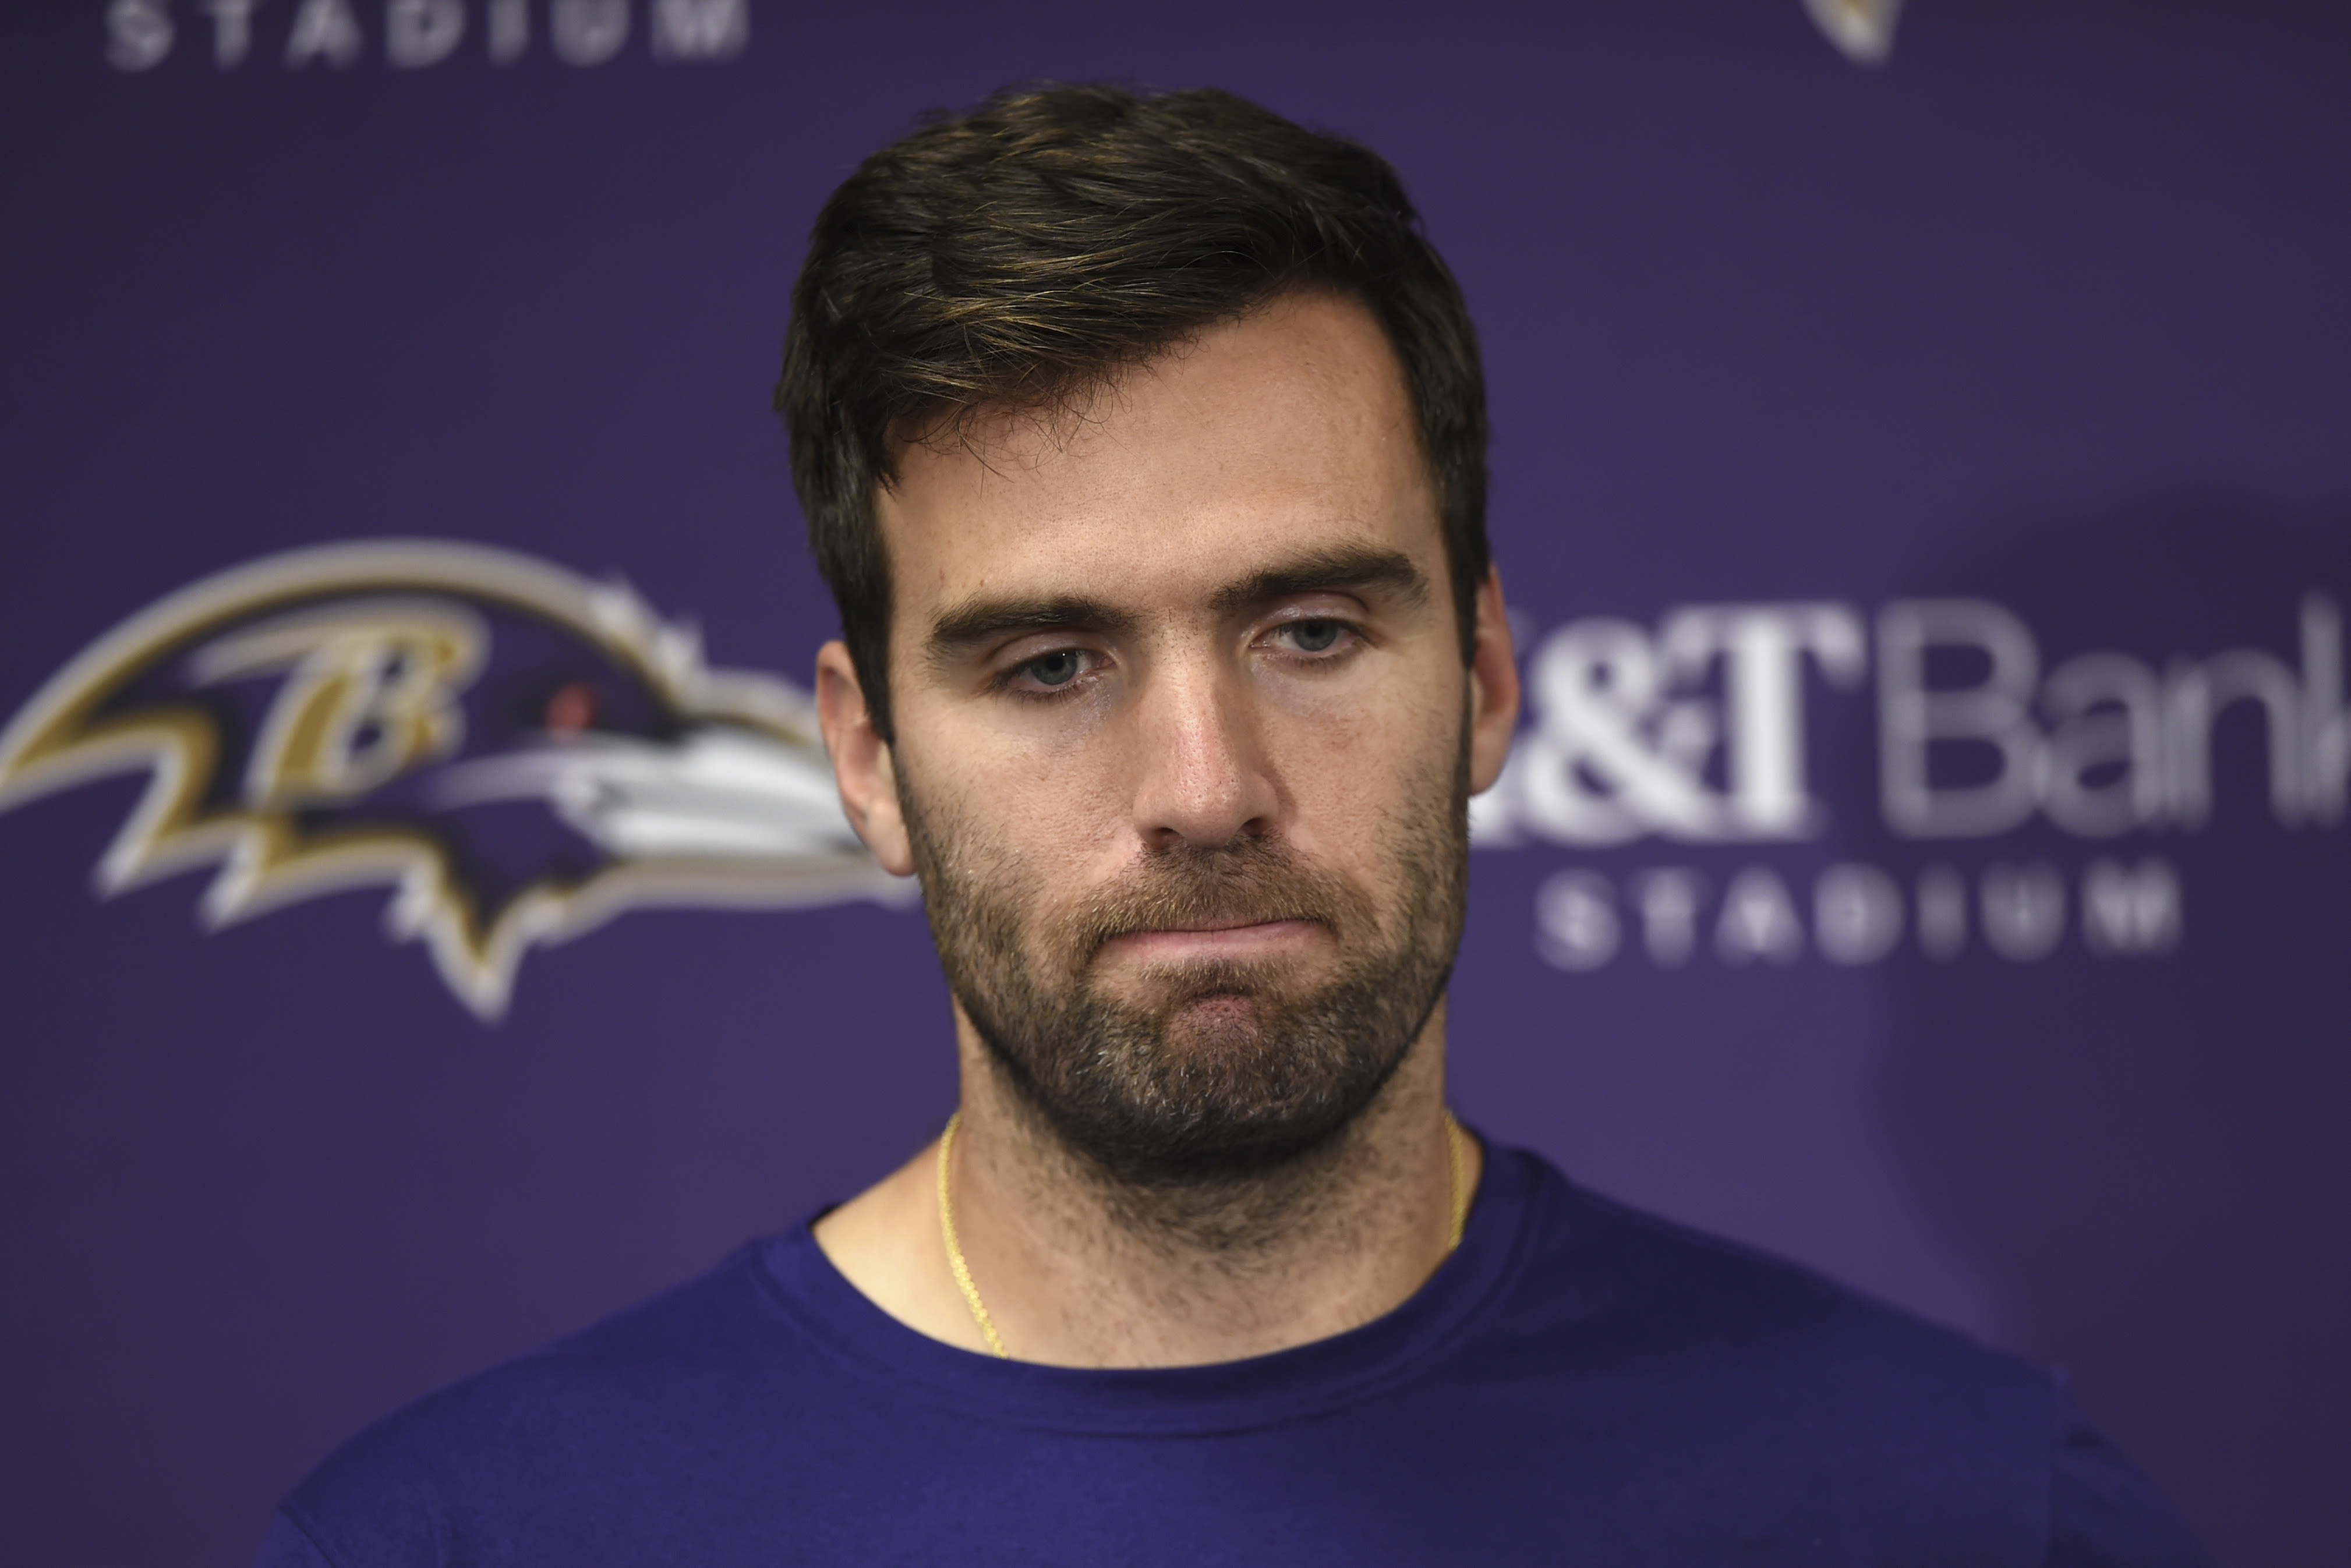 Report: Flacco expected to change uniforms in 2019